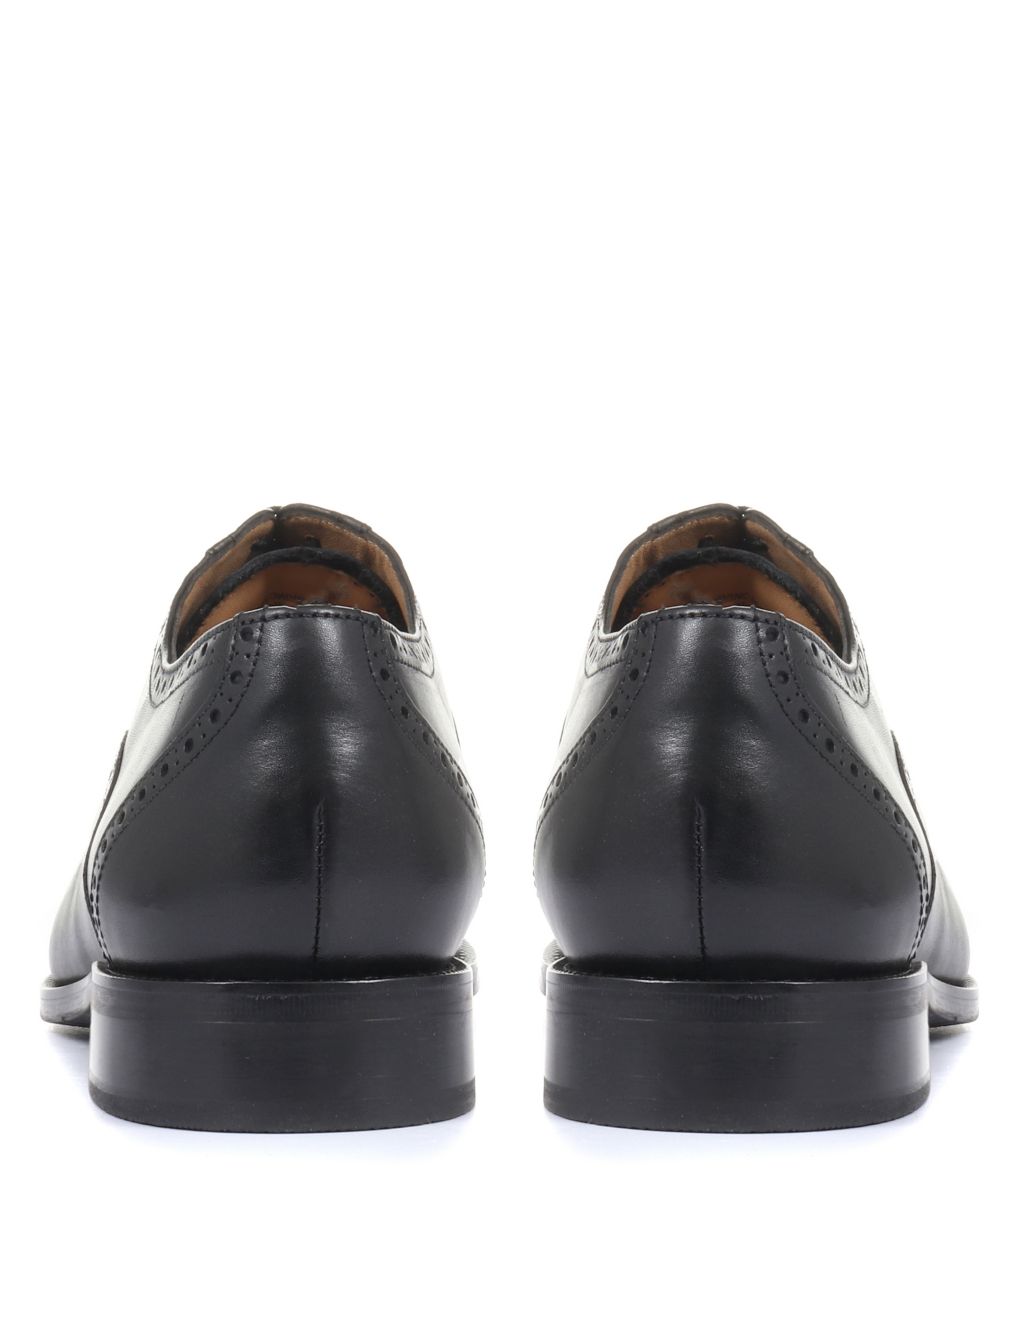 Wide Fit Leather Oxford Shoes | Jones Bootmaker | M&S